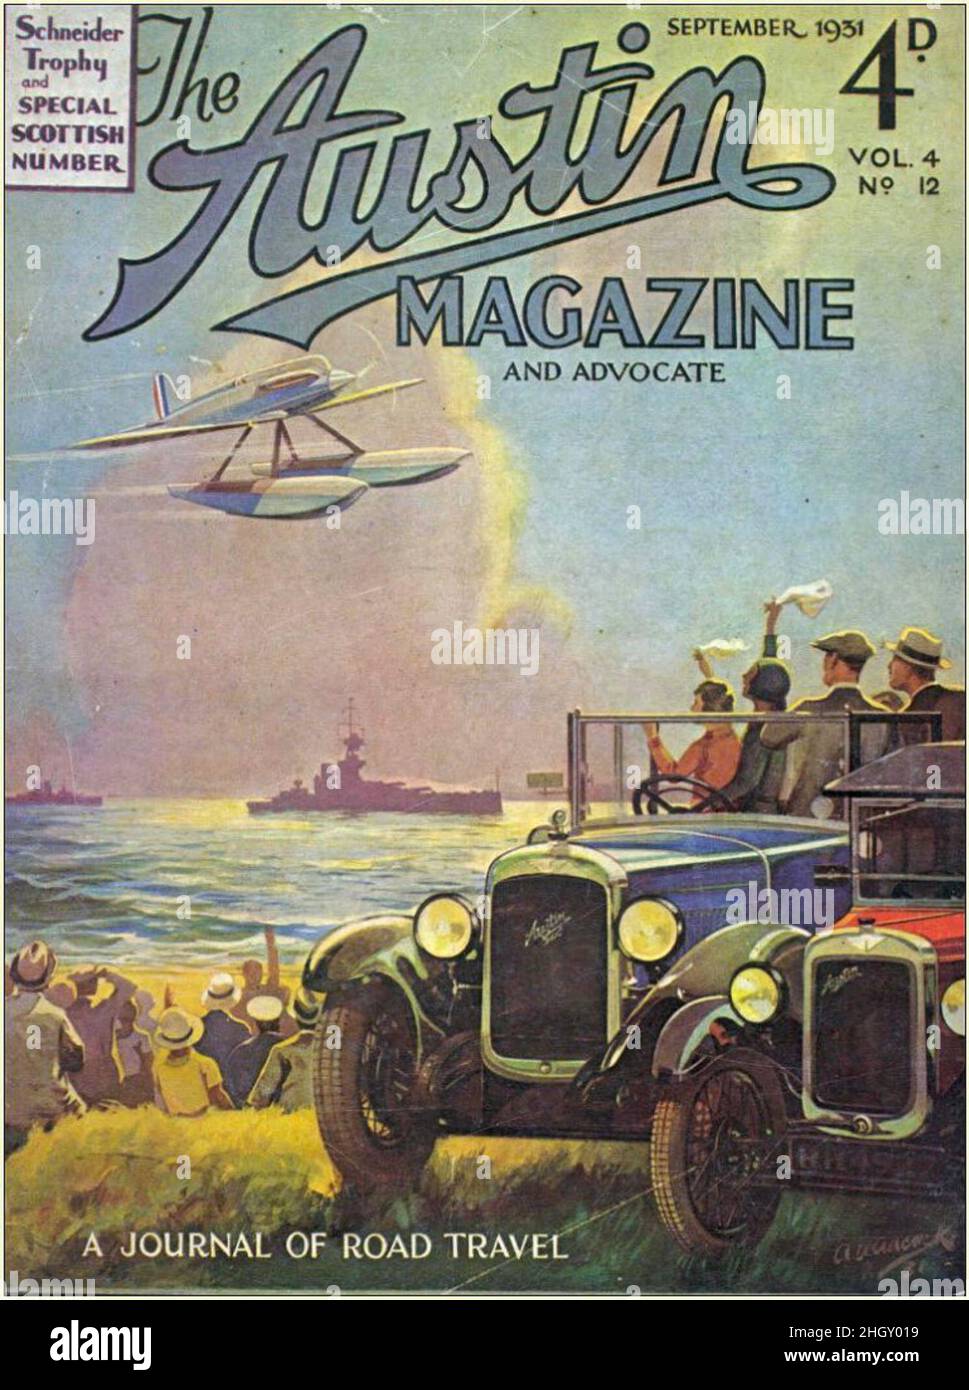 A vintage 1931 edition of the Austin magazine, showing an aircraft from the Schneider Trophy Stock Photo